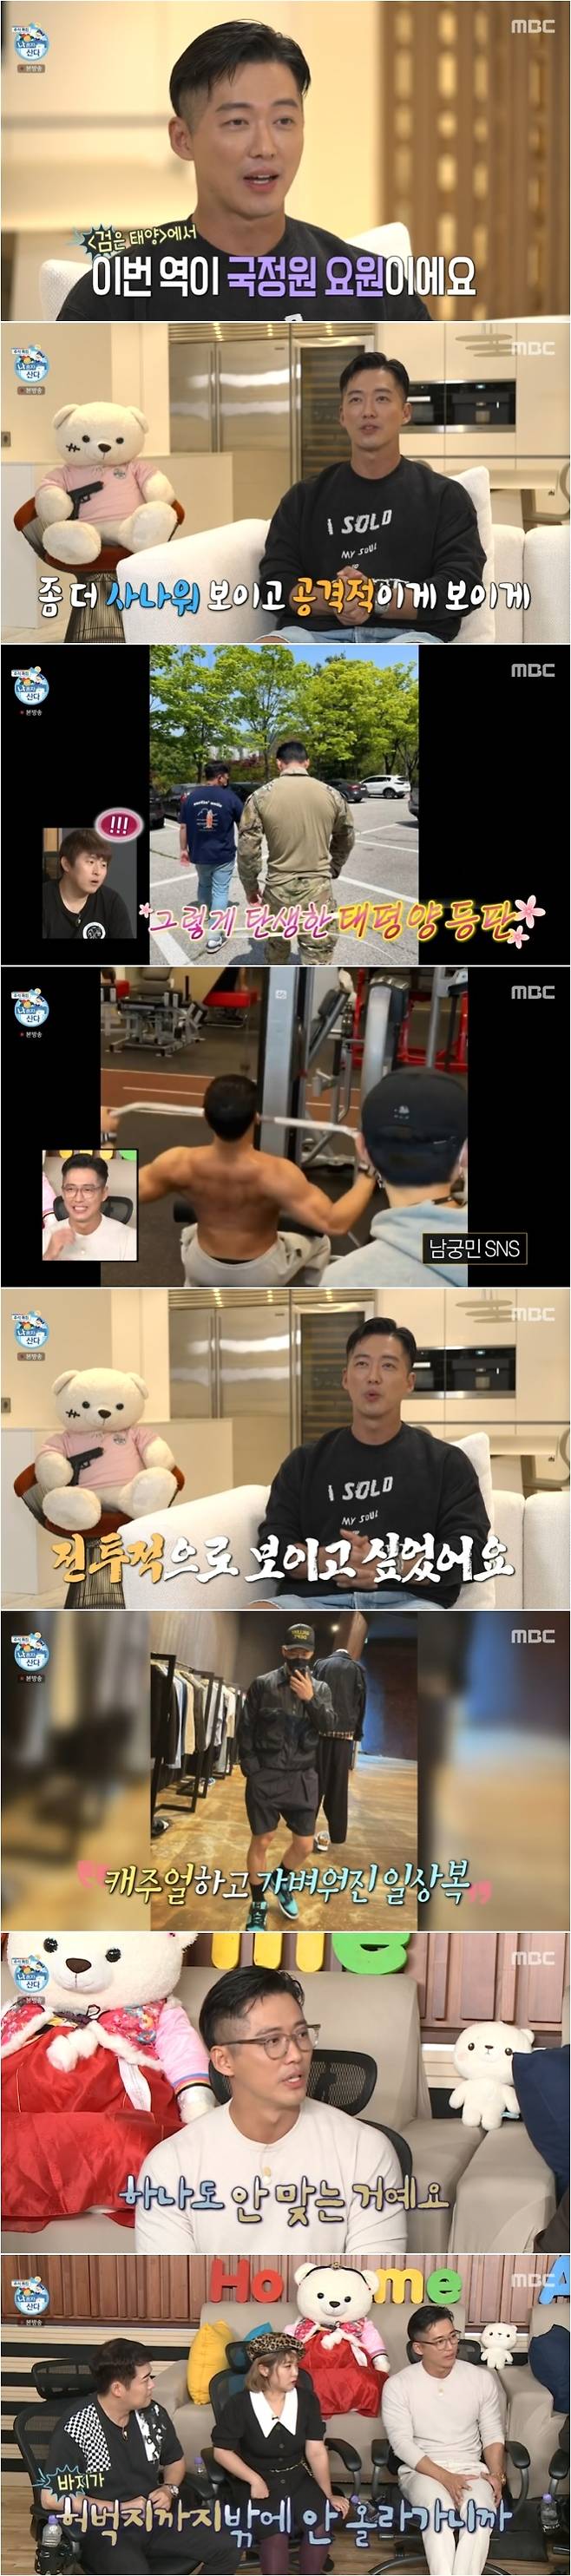 Namgoong Min reveals why he bulked upMBC I Live Alone broadcast on September 17th, MBC new drama Black Sun in the role of Ace One One One in the role of bulk-up Namgoong Min was revealed.Namgoong Min laughed at the impression that he was stronger through Exercise, saying, I am impressed even if I look at it.Namgoong Min said, As I took on the role of One Ace, I became Exercise to make it look more fierce and aggressive.I wanted to look combative, no matter who saw it, he explained.Namgoong Min, who was 64kg in the past, said, My body was big and my favorite clothes did not fit.I do not even go into pants, Kian84 said, I want to feel this catharsis. 